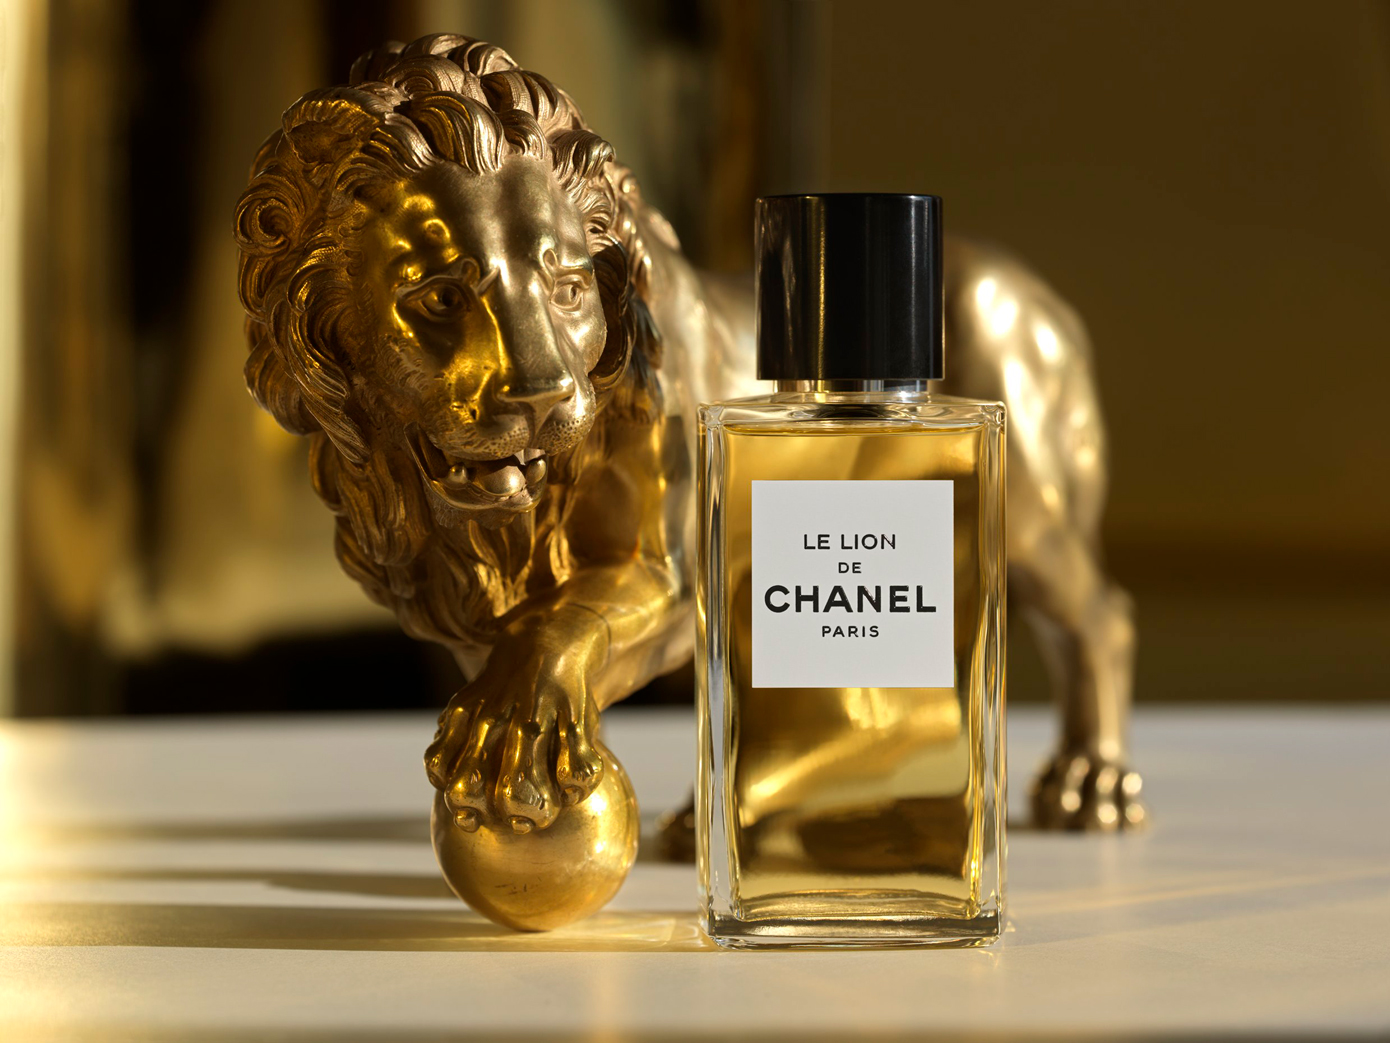 Chanel's Newest Perfume Makes 2021 the Year of the Lion - The